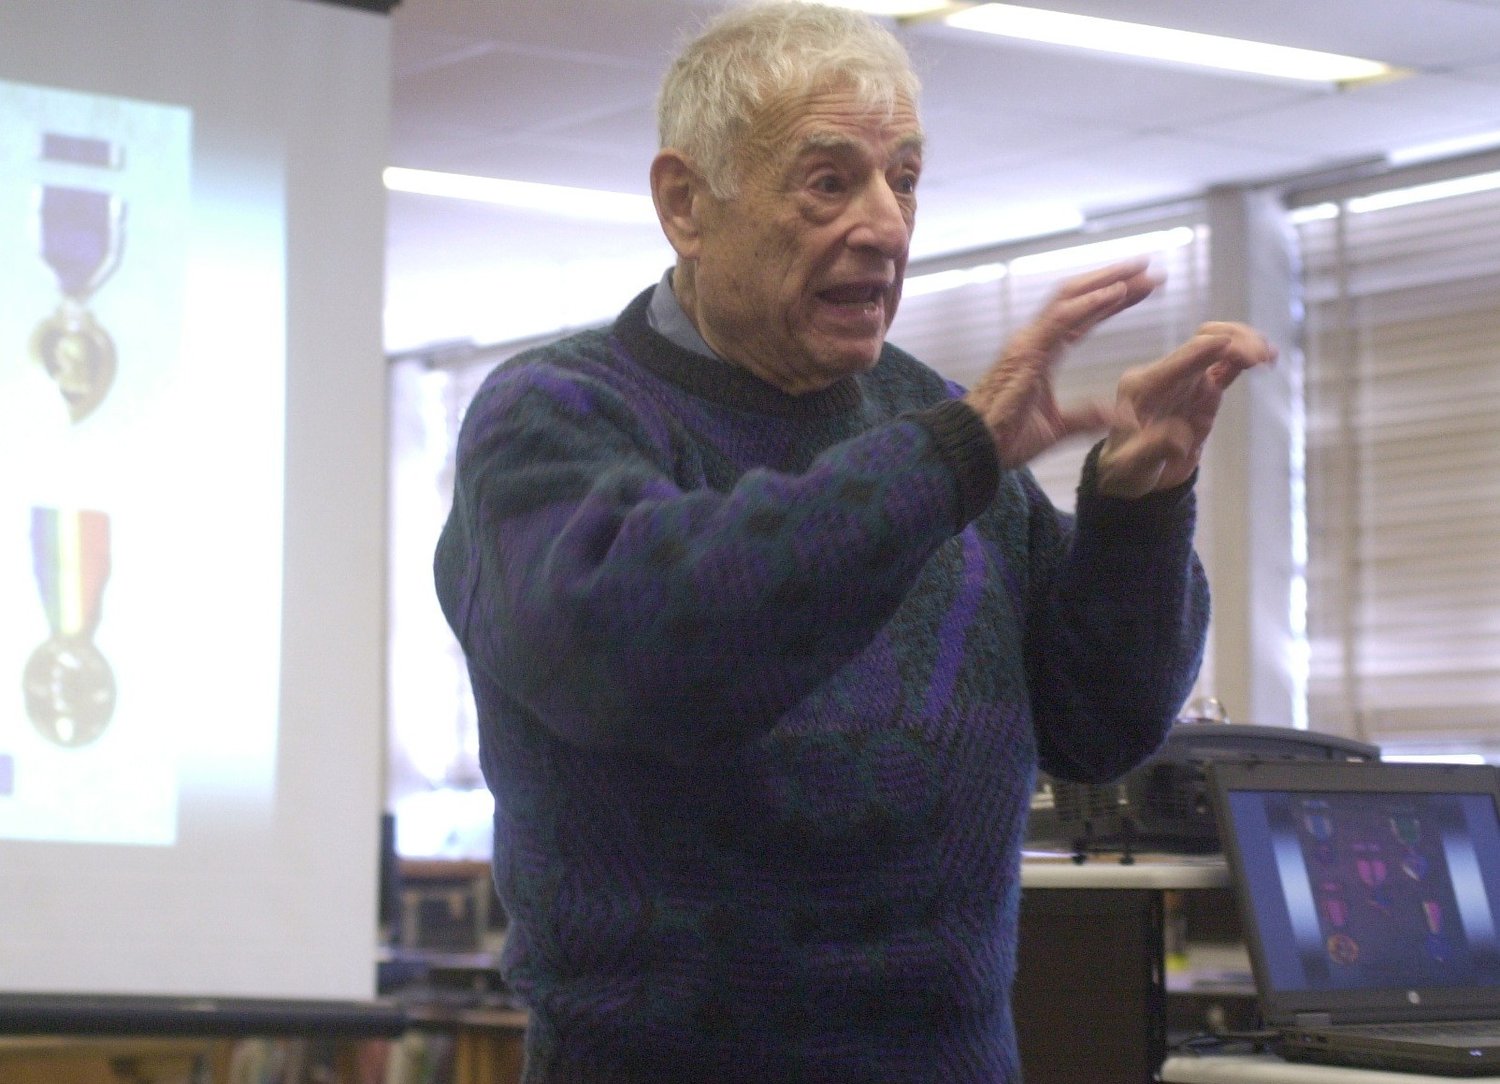 World War II hero Bernard Rader of Freeport delivered a talk about his harrowing experiences in battle at Kennedy High School in Bellmore in 2013.